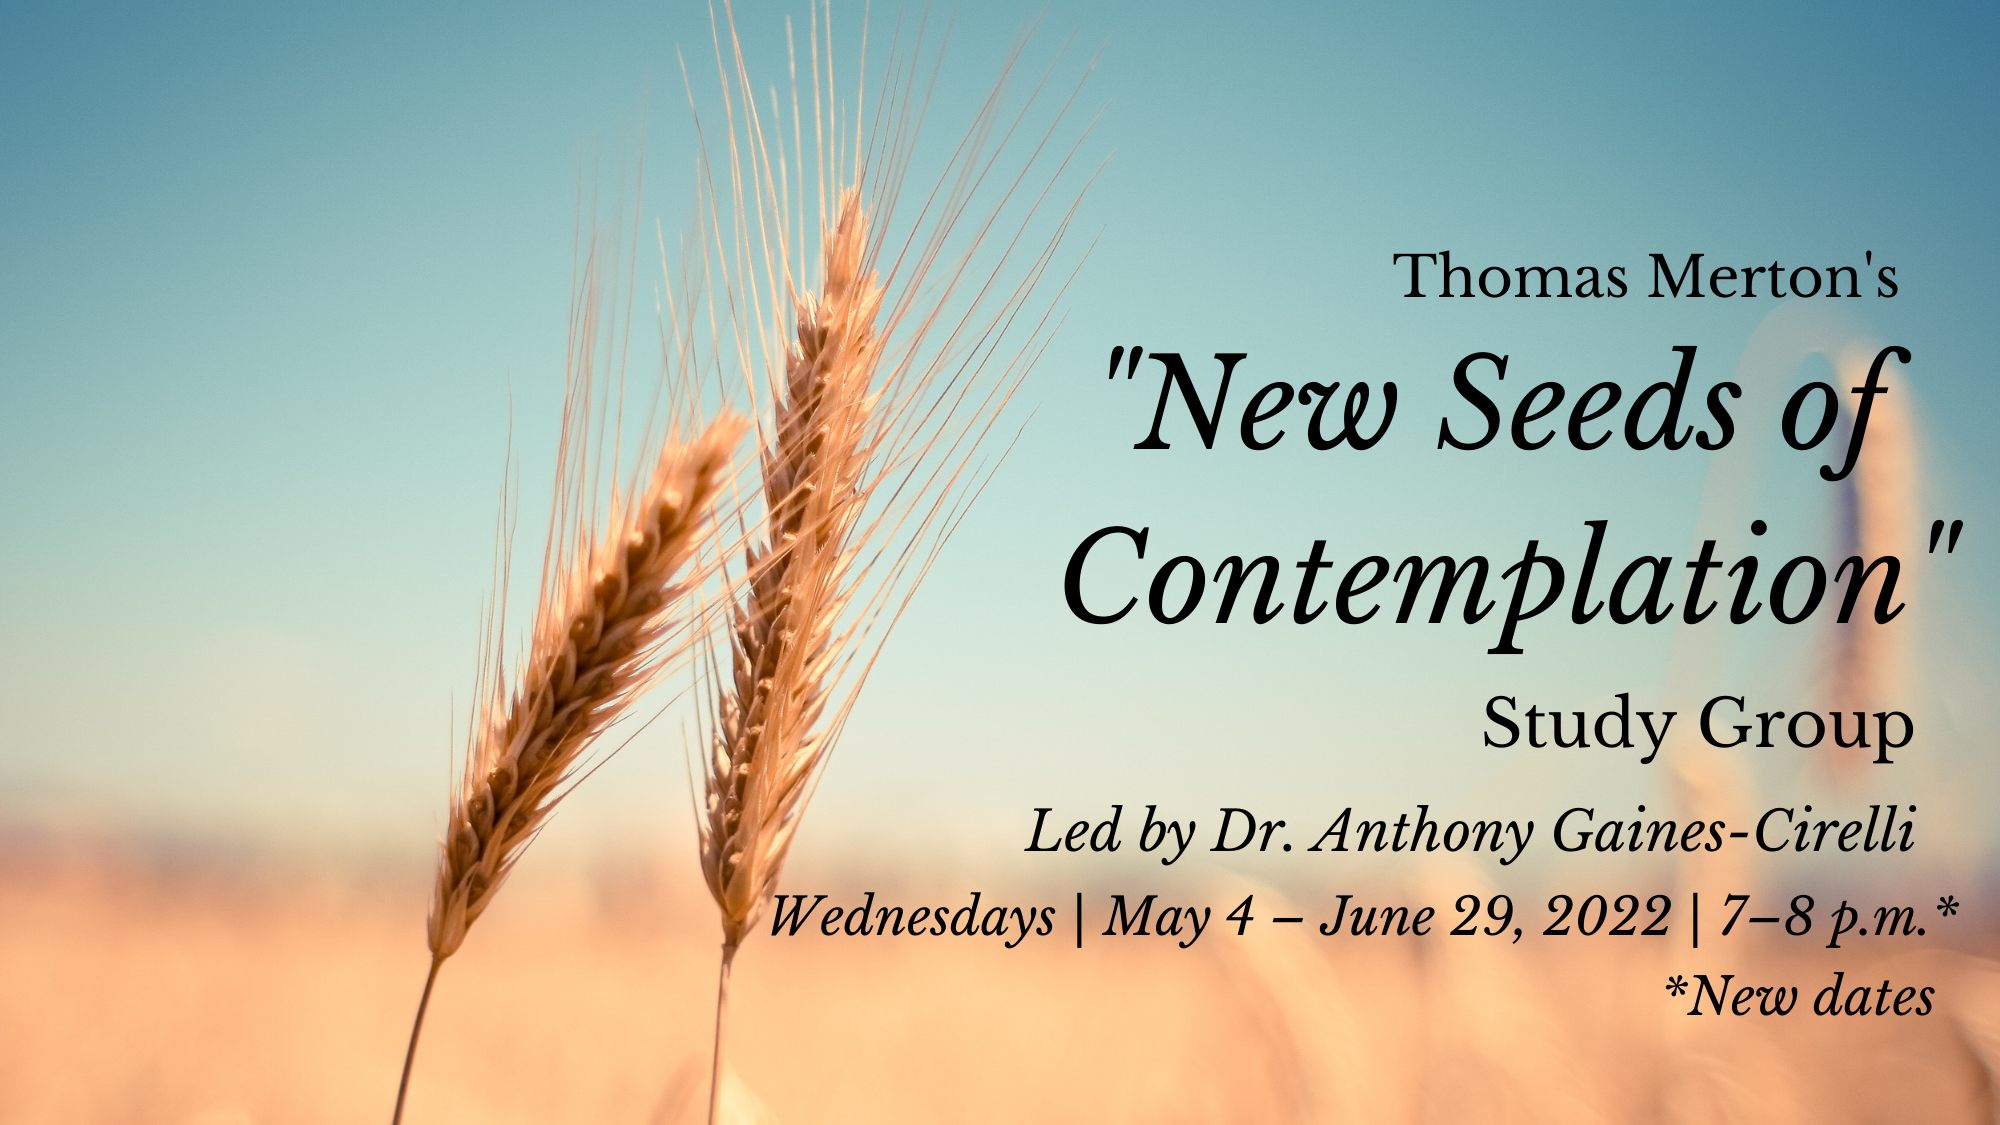 Thomas Merton's "New Seeds of Contemplation" Study Group